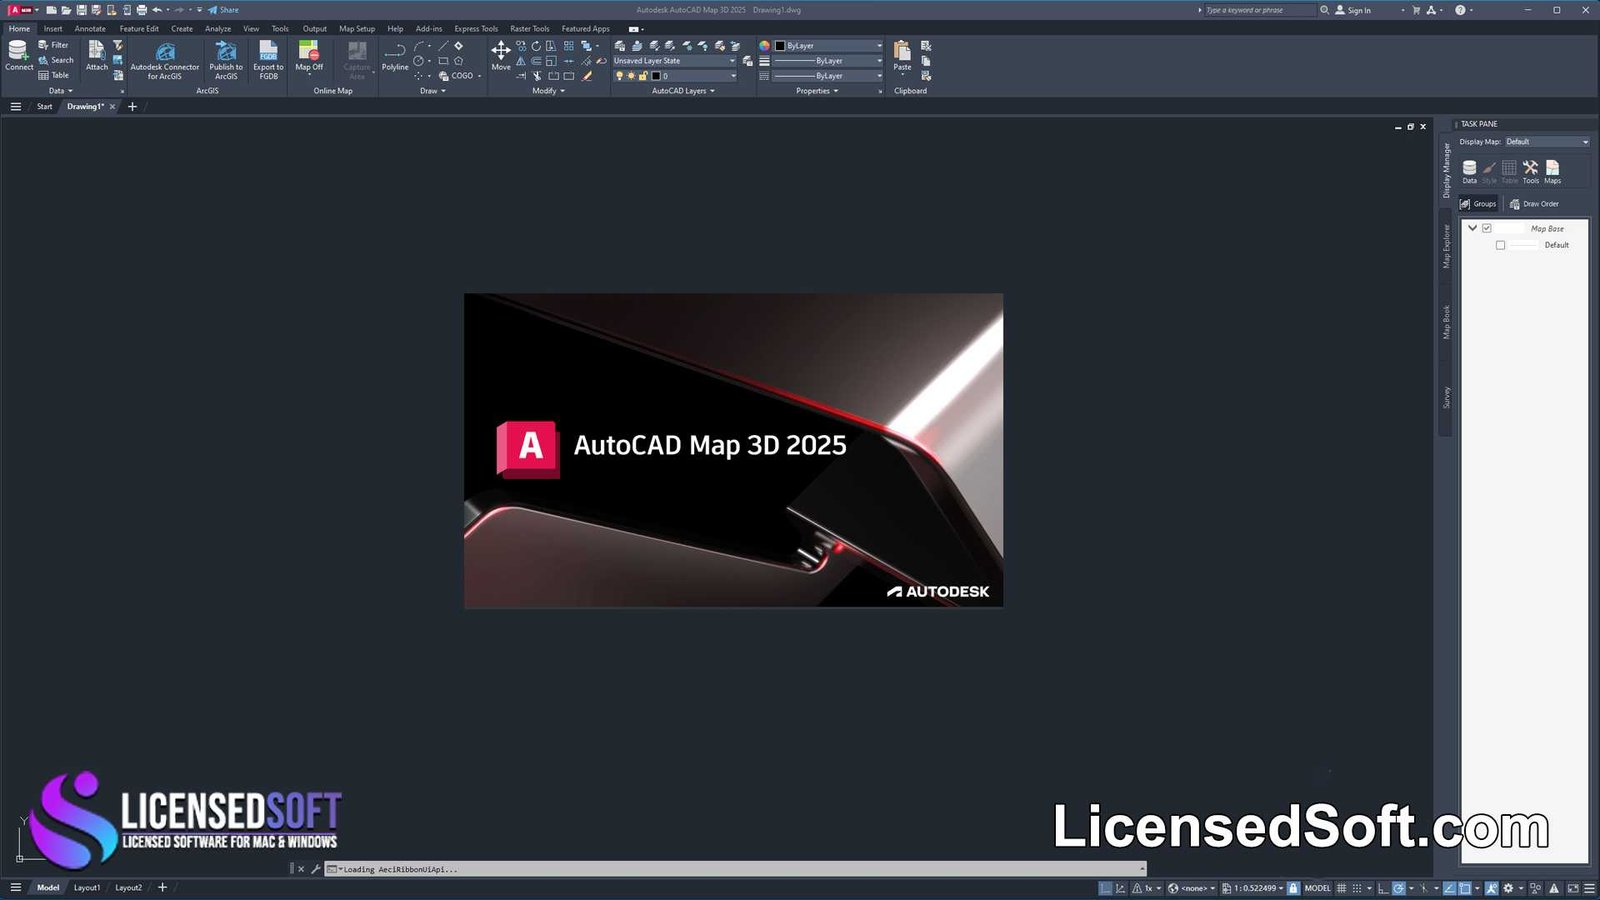 Autodesk AutoCAD Map 3D 2025 Perpetual License By LicensedSoft